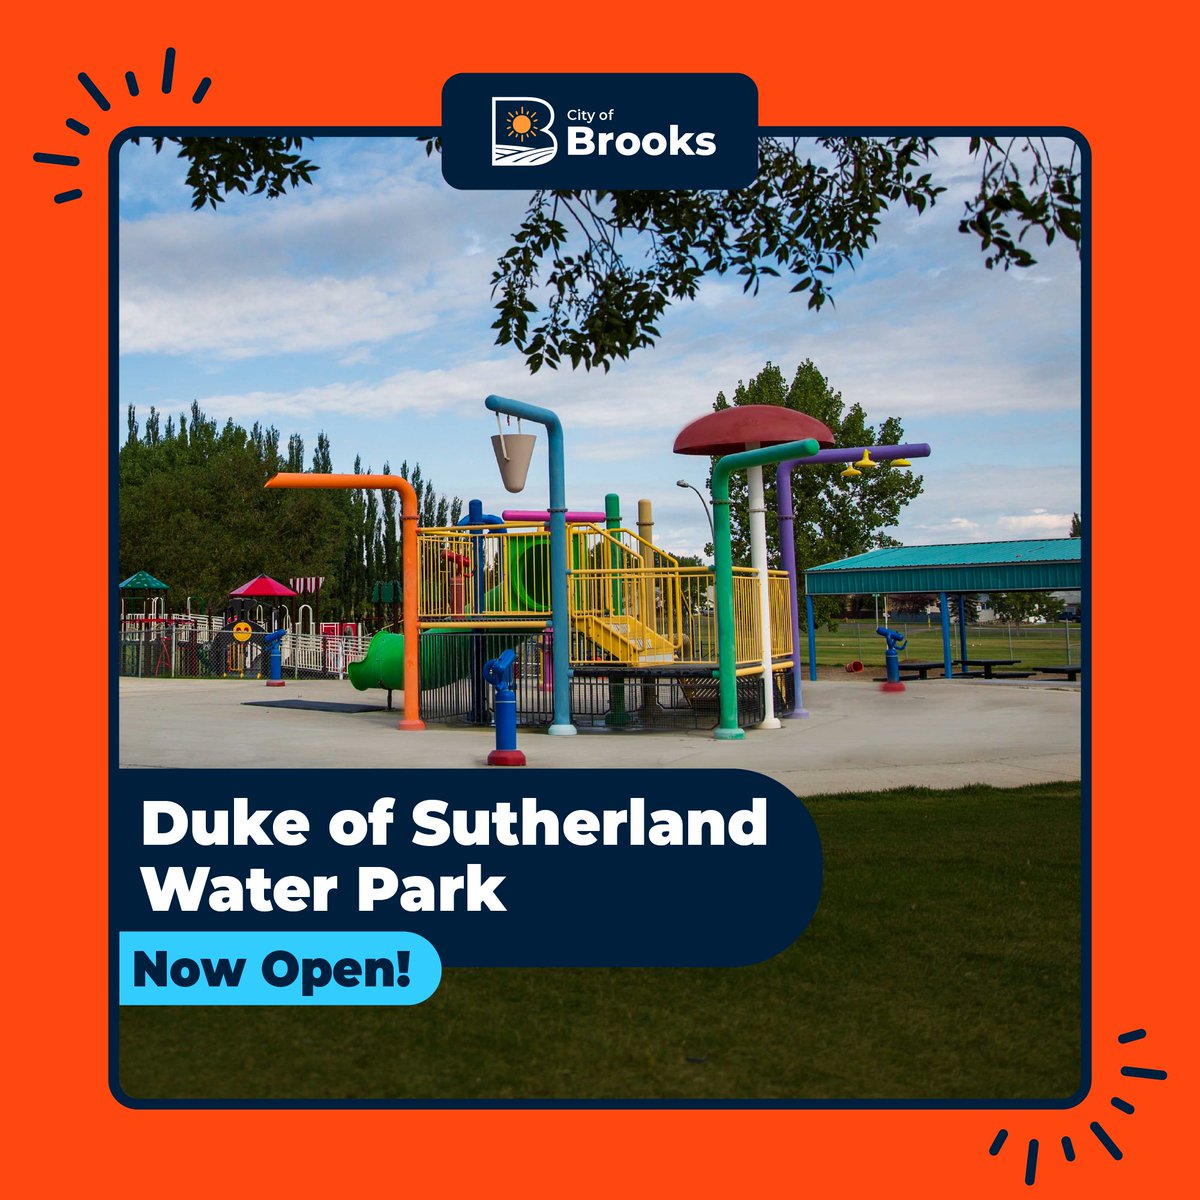 Get out and enjoy the Duke of Sutherland Water Park this long weekend!